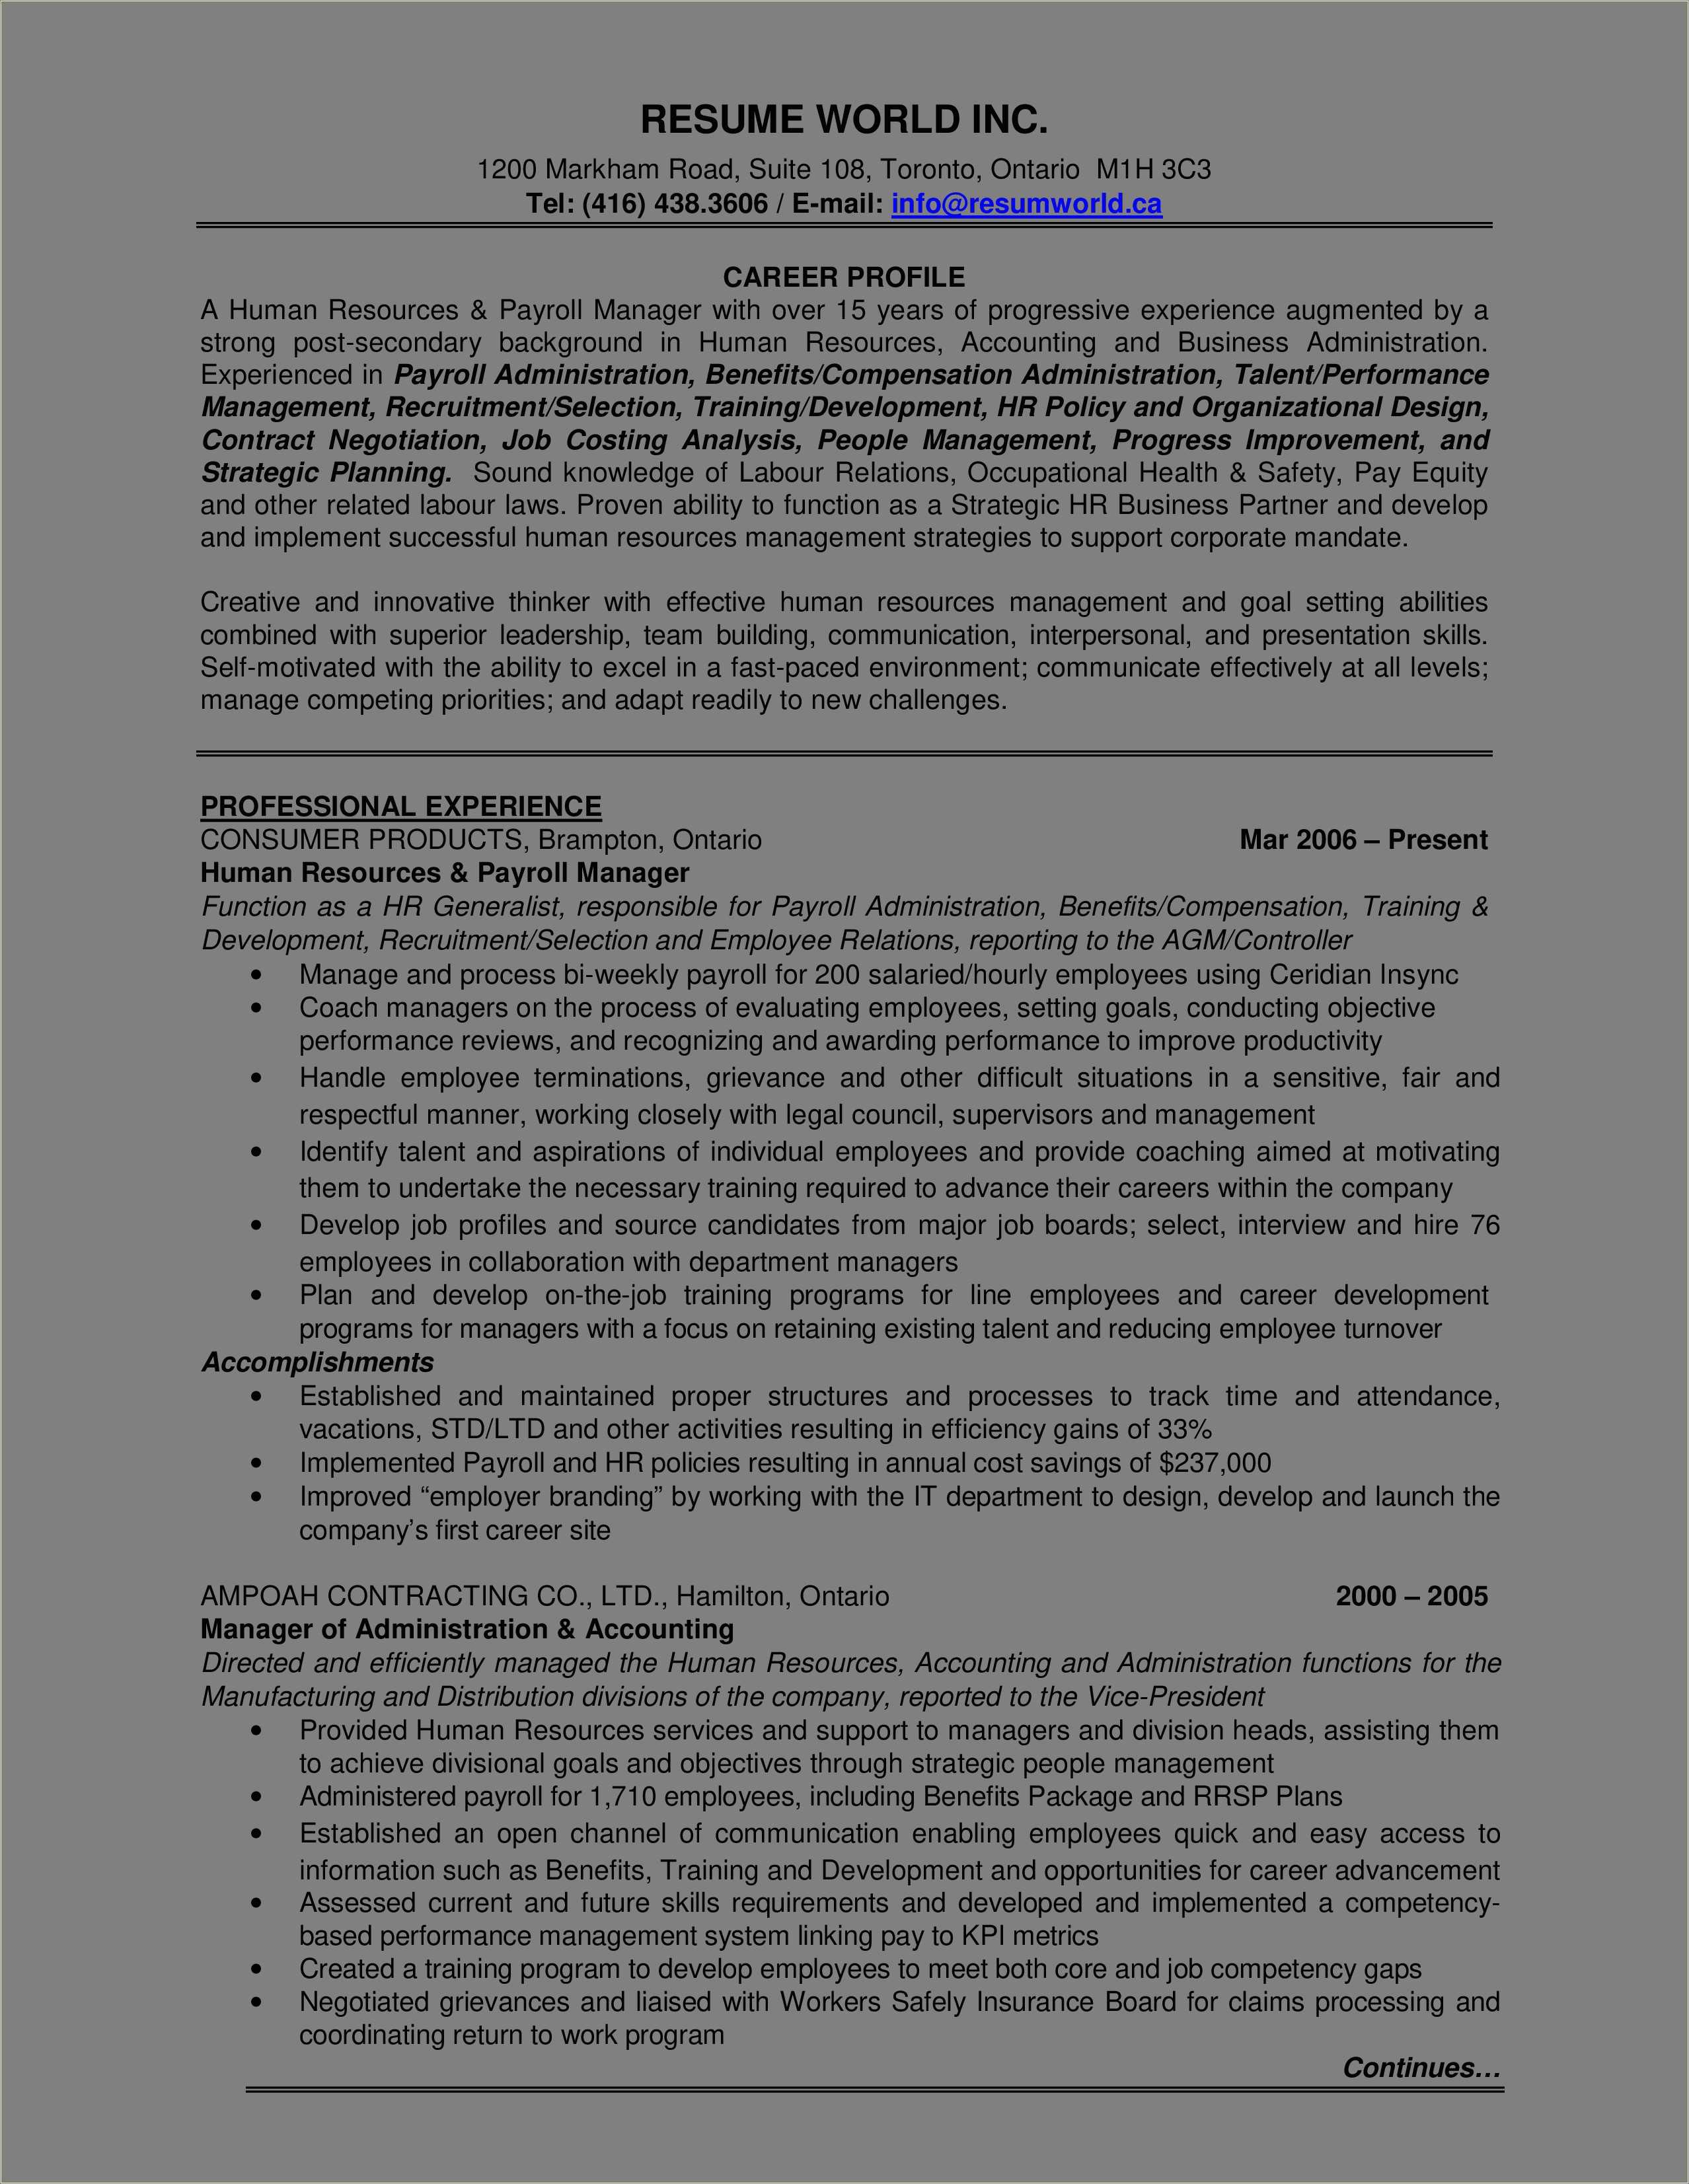 Human Resources Resume Templates Entry Level - Resume Example Gallery